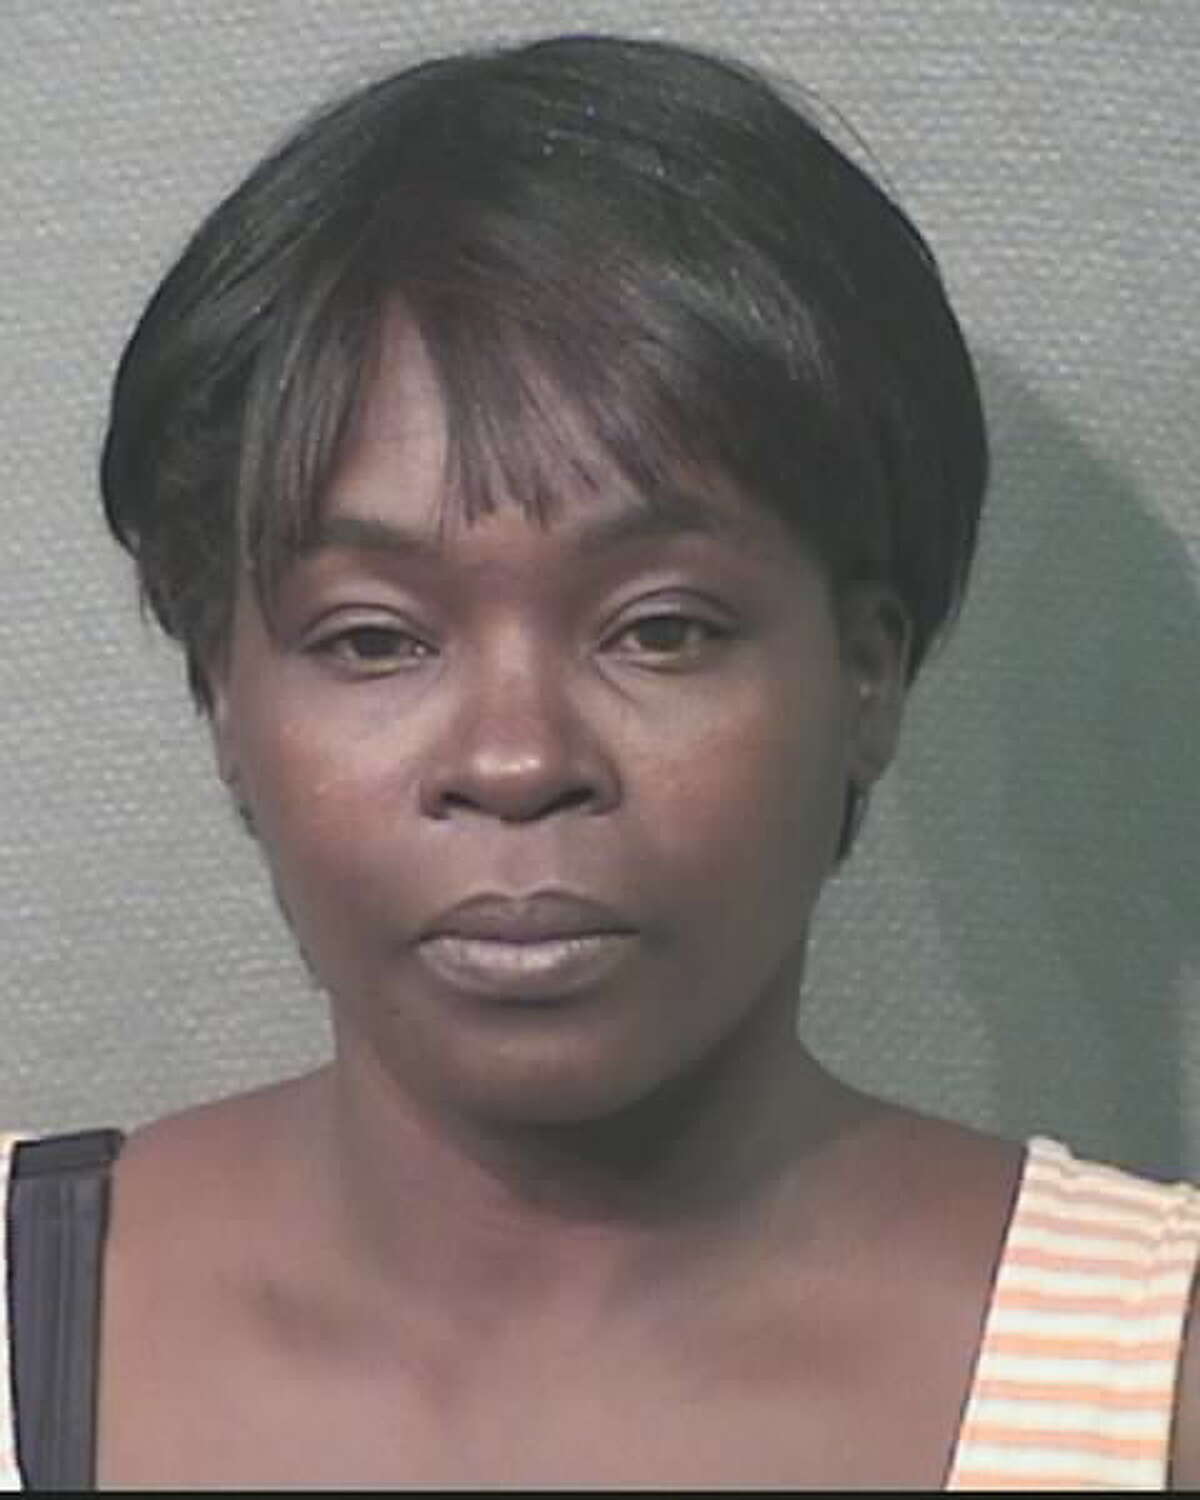 Linda Ahmed was arrested by Houston Police in January 2016 and charged with felony prostitution.